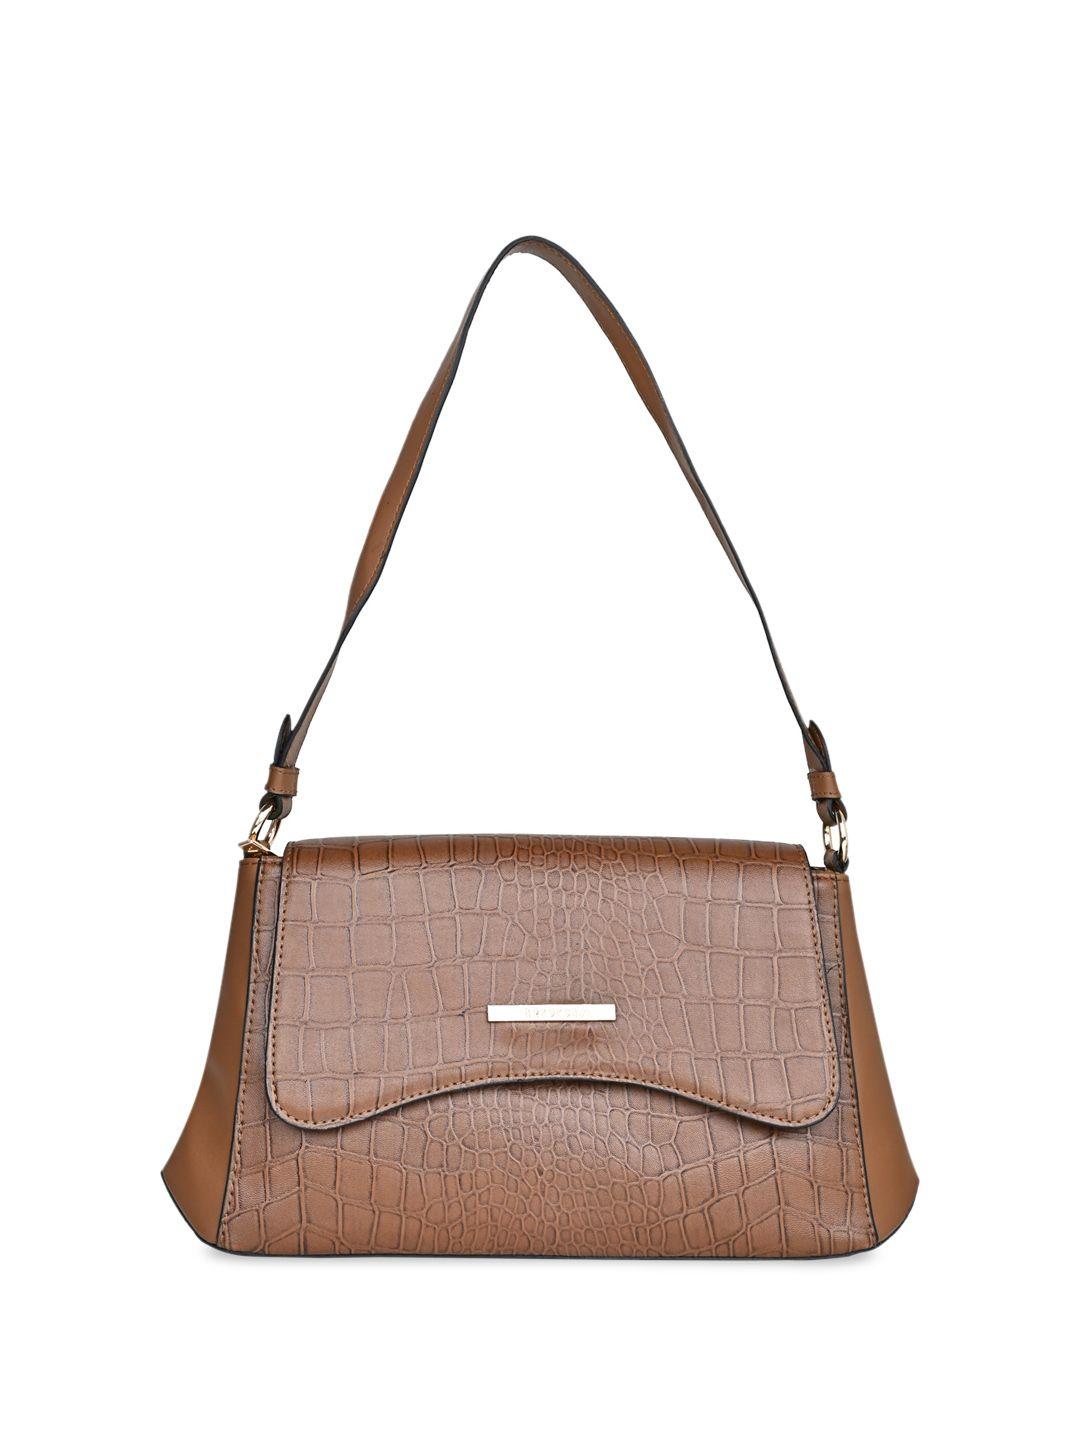 rocia textured structured sling bag